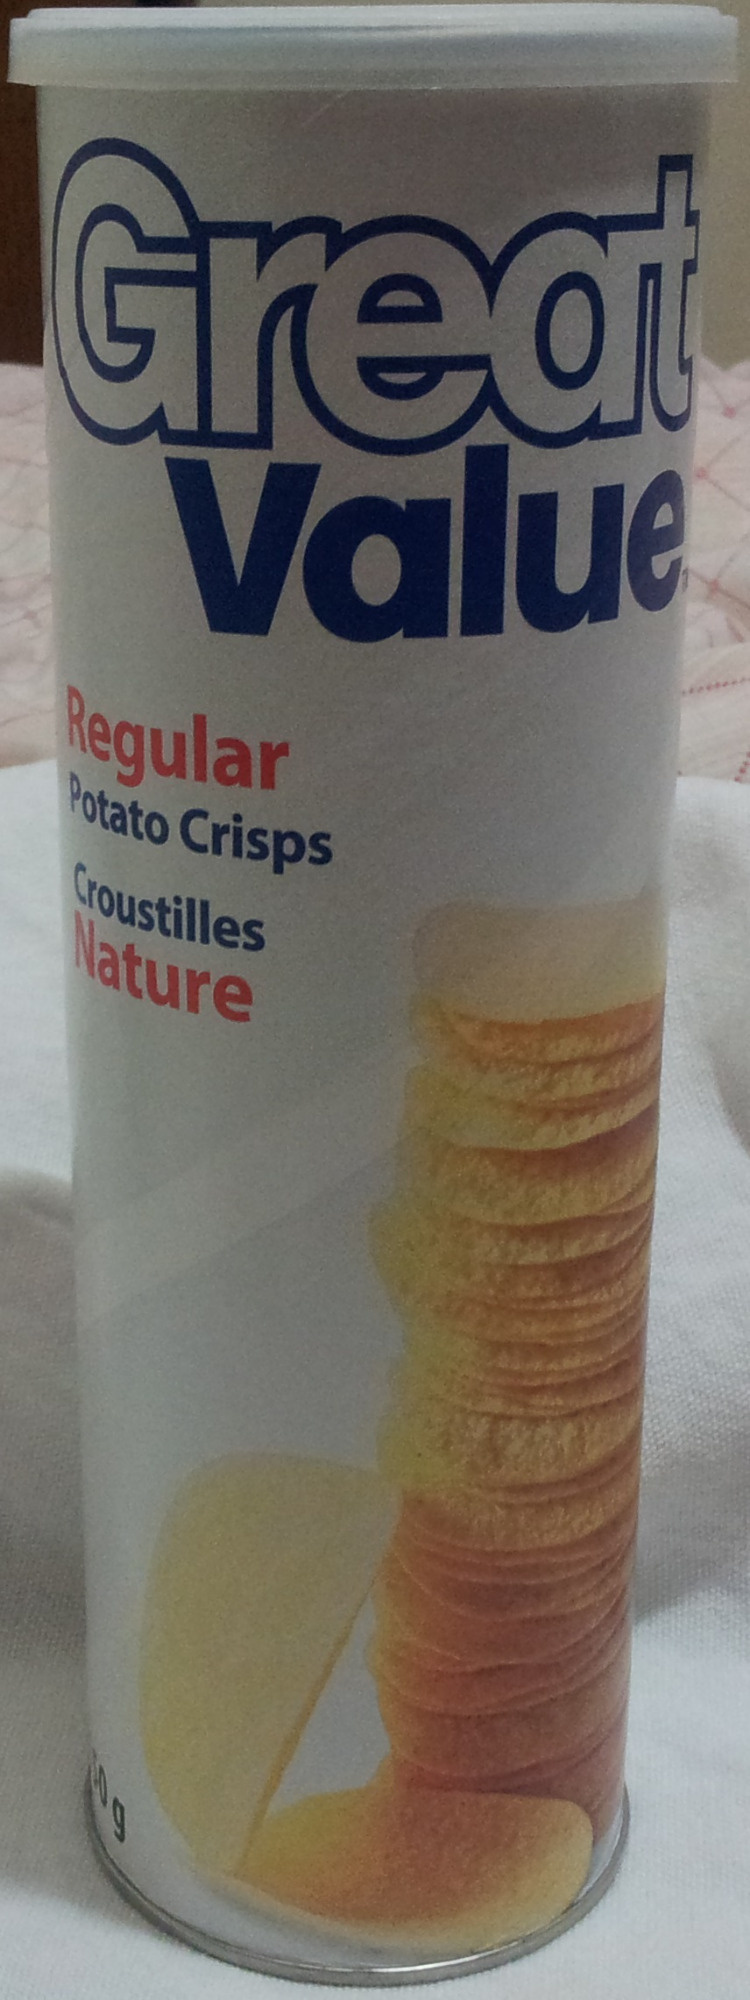 Chips - Product - pt